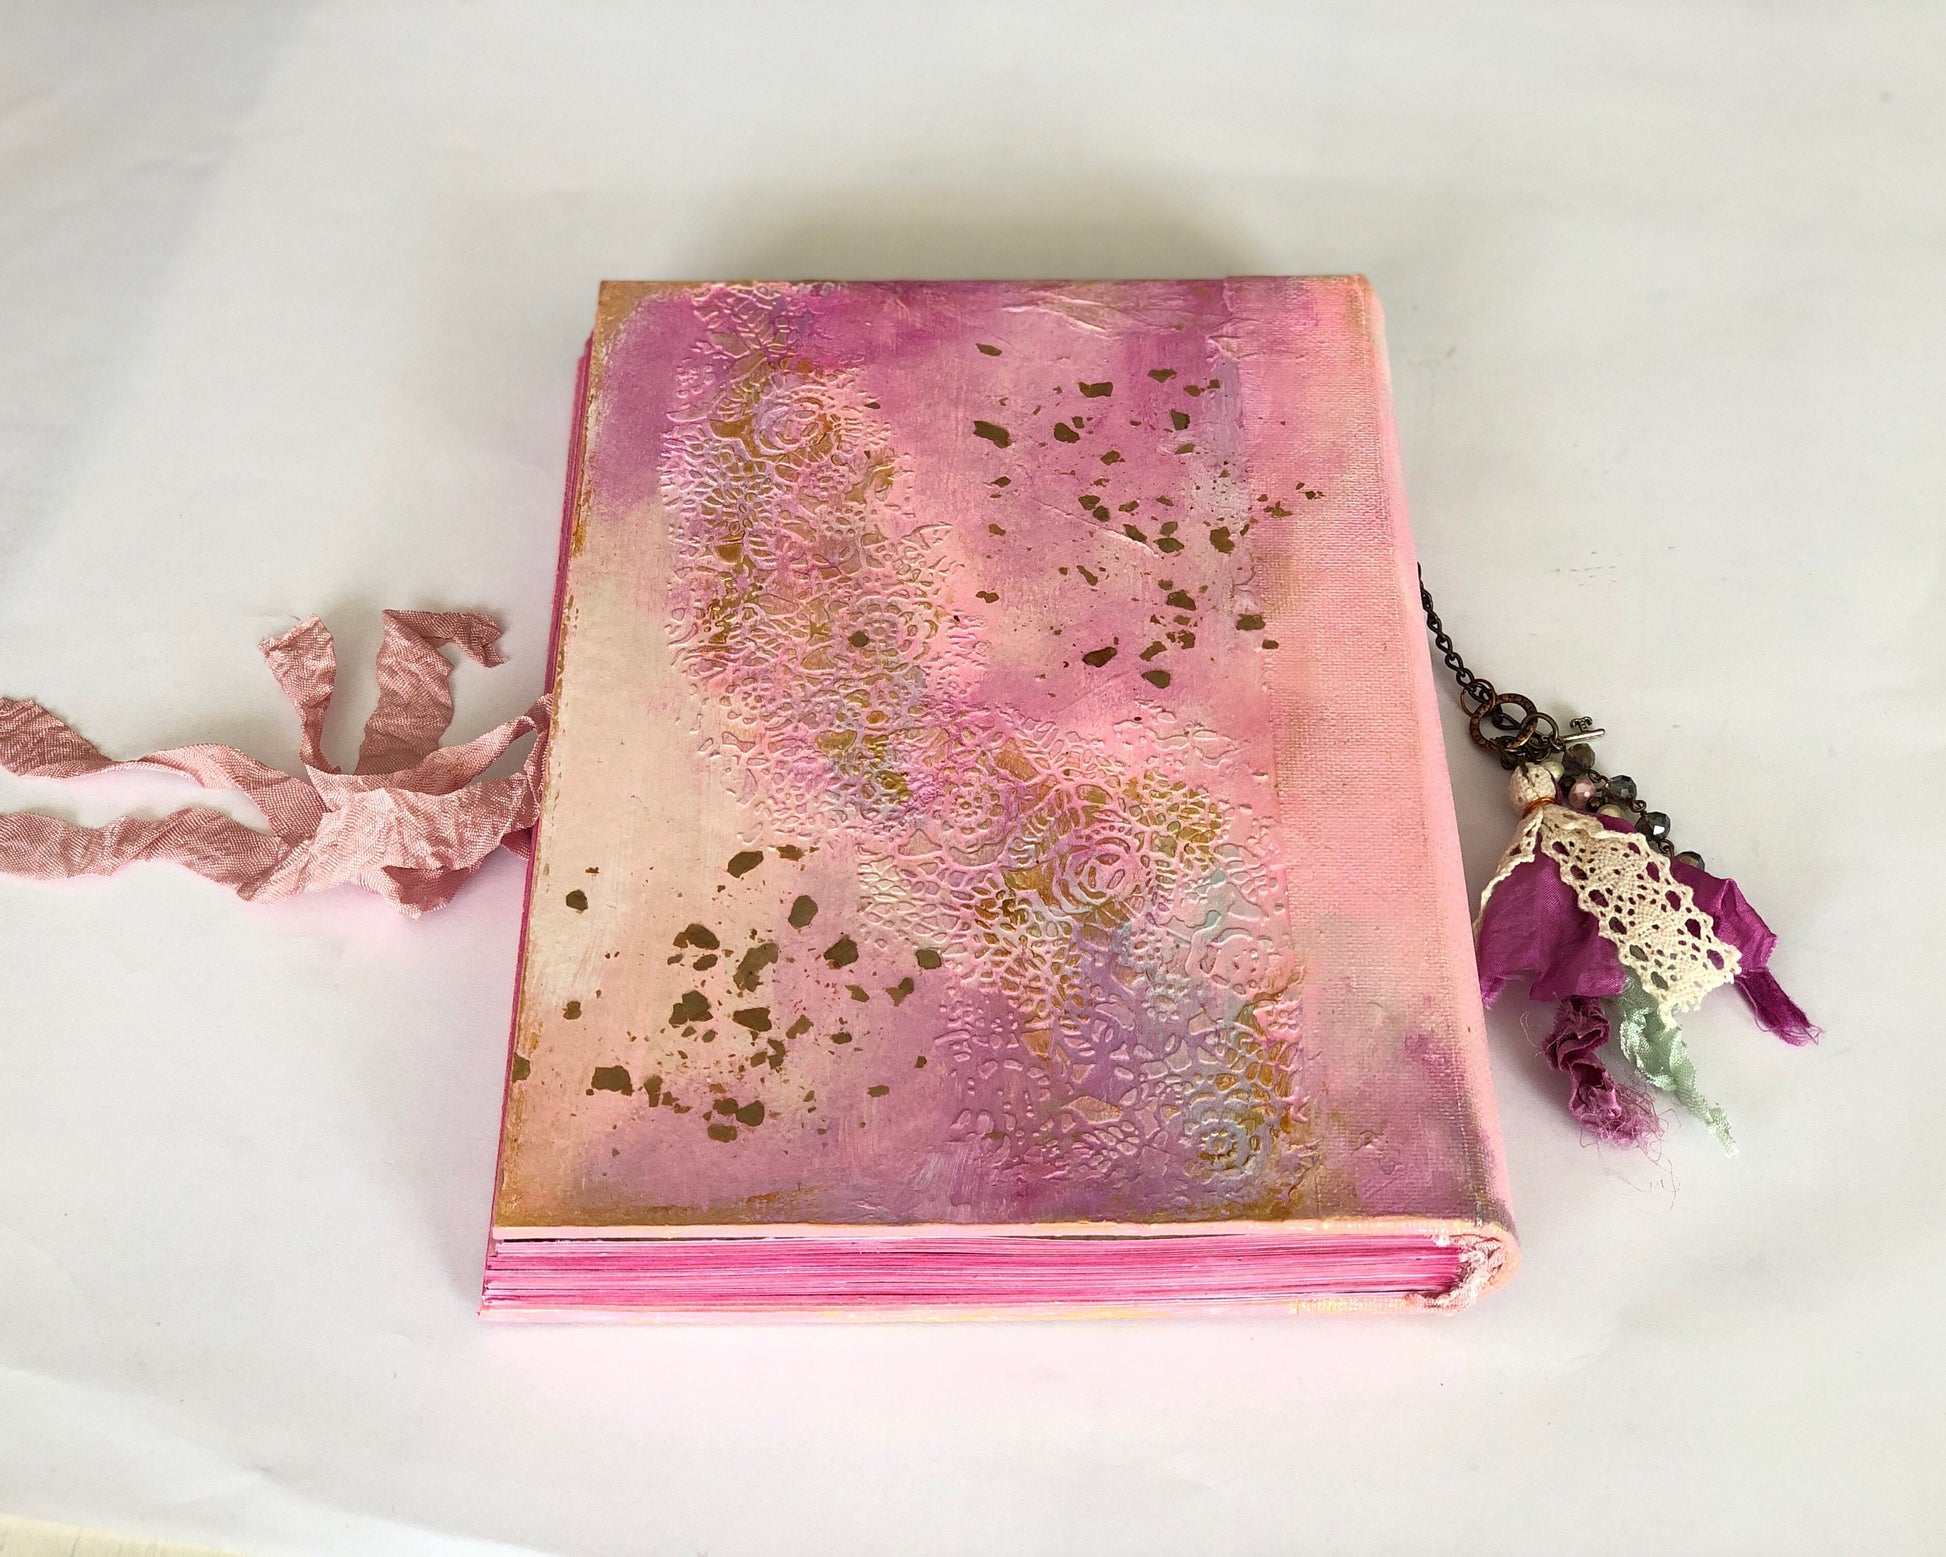 Fairytale Junk Journal Diary Book, Wedding Guest book with